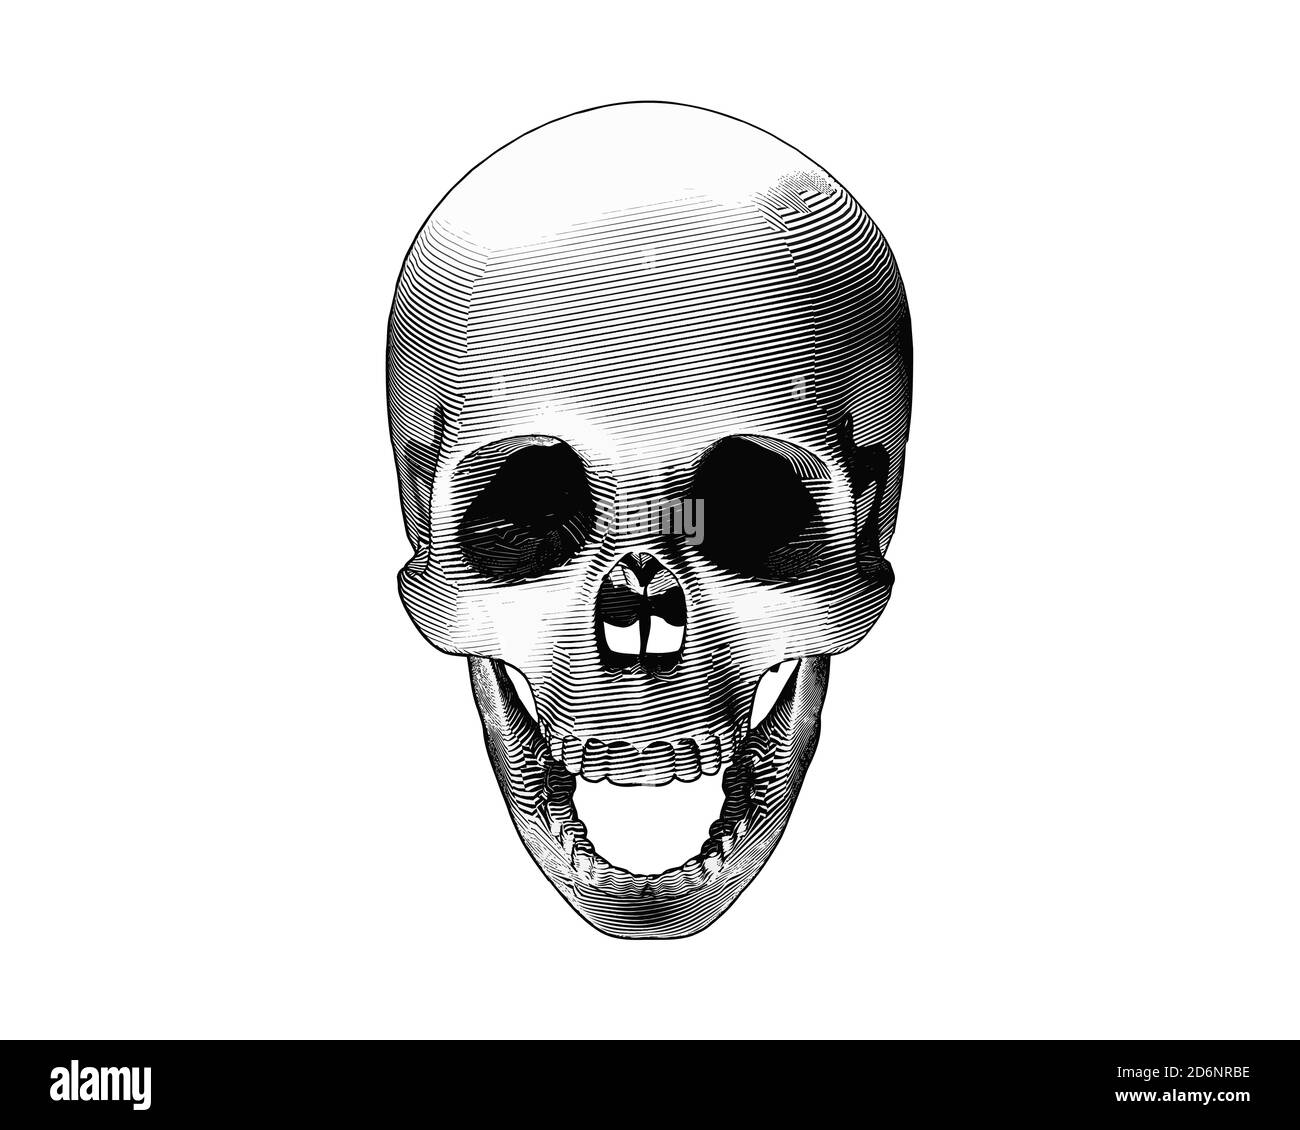 Human Skull Top View Black And White Stock Photos And Images Alamy